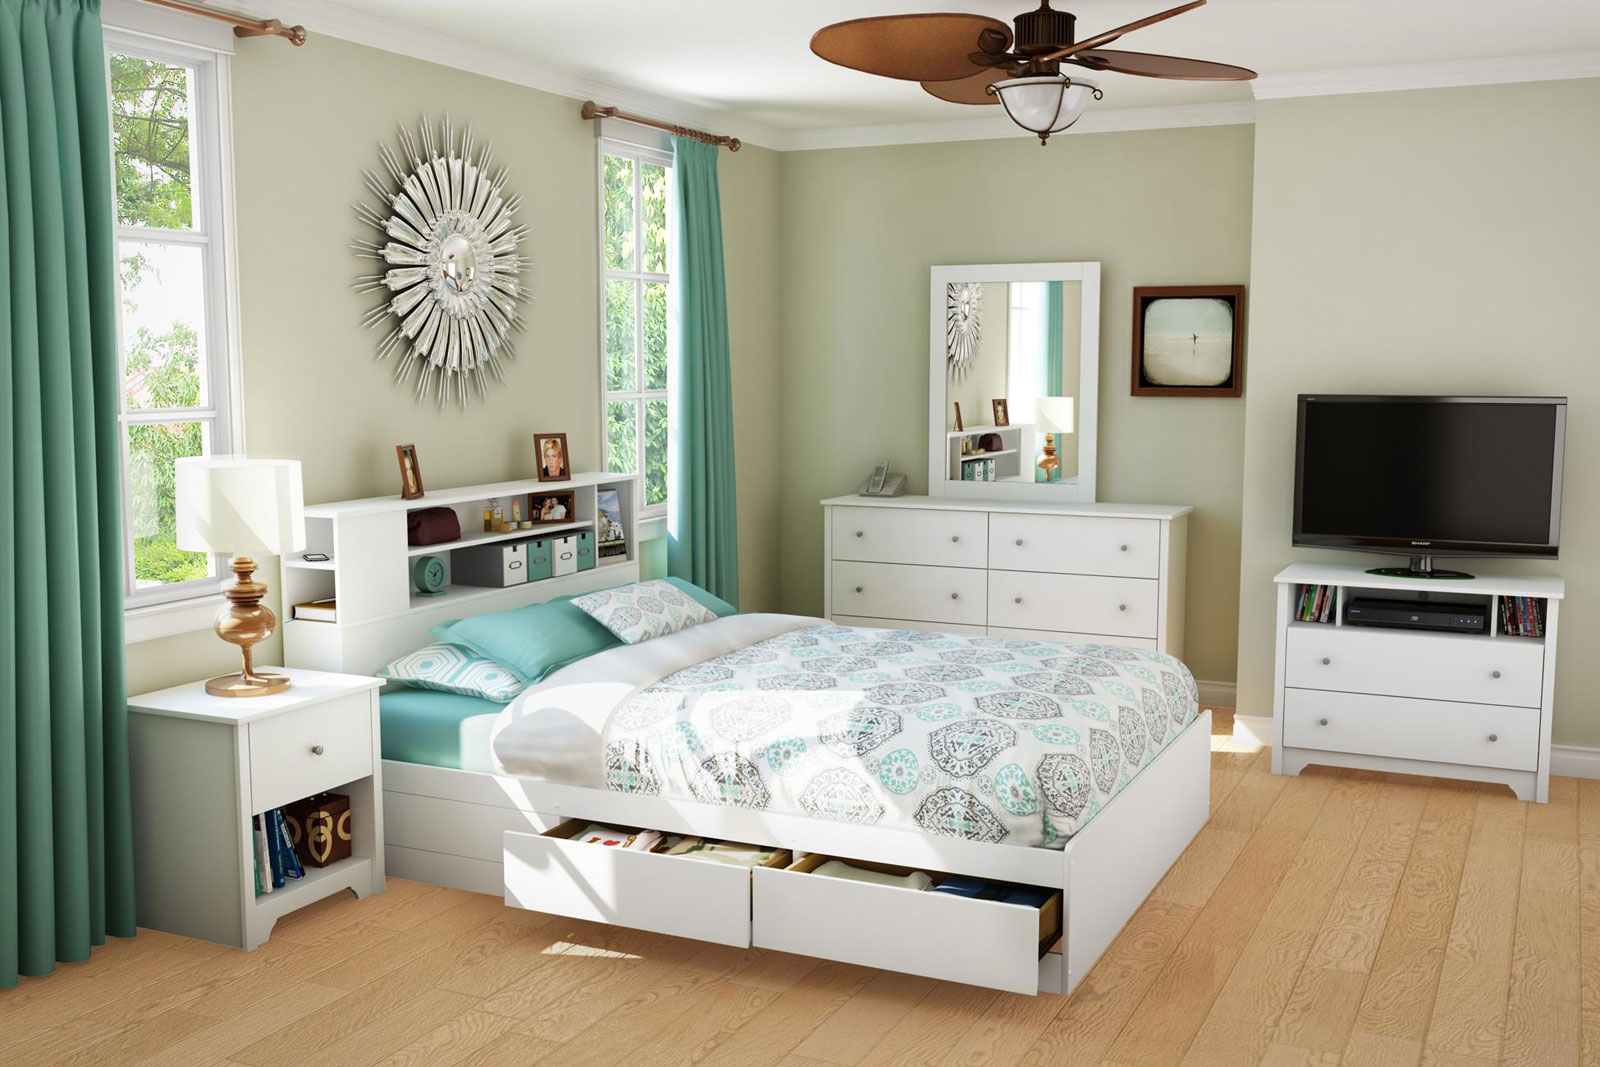 Queen Bedroom Contemporary Marvelous Queen Bedroom Sets In Contemporary Bedroom Including Queen Bed Applying Platform Drawers With Cabinet Headboards Furnished With Night Lamp On Nightstand Bedroom Queen Bedroom Sets For The Modern Style